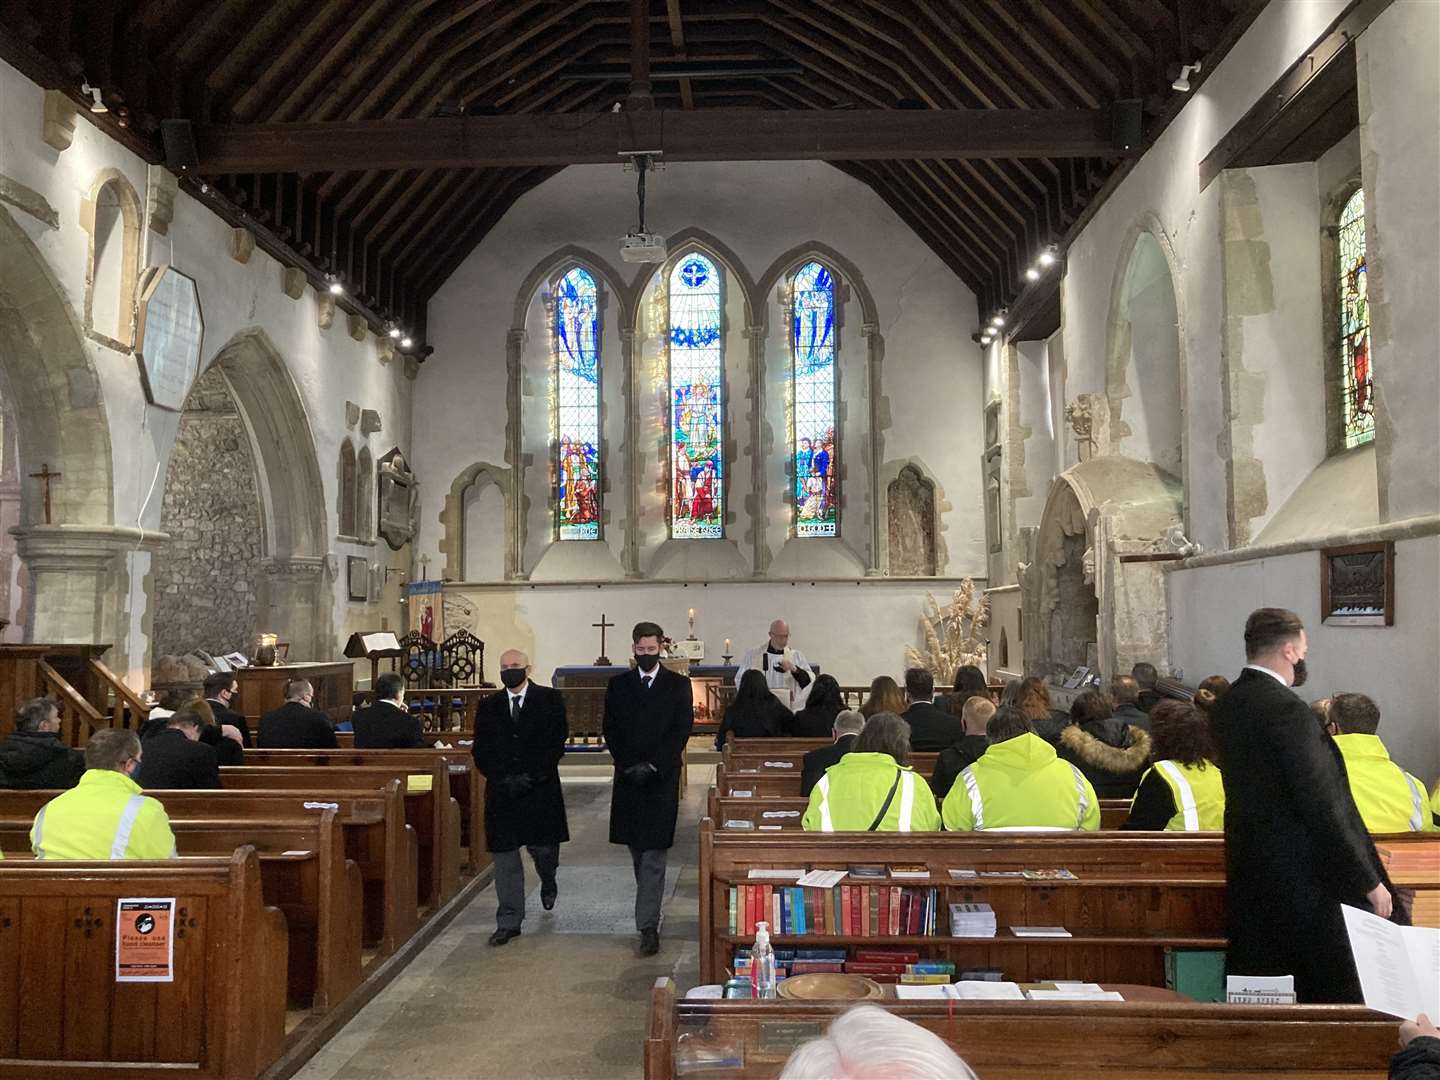 Sheppey EMUs founder David O'Neill's funeral at Minster Abbey saw guests wear yellow hi vis jackets in his honour. Picture: John Nurden